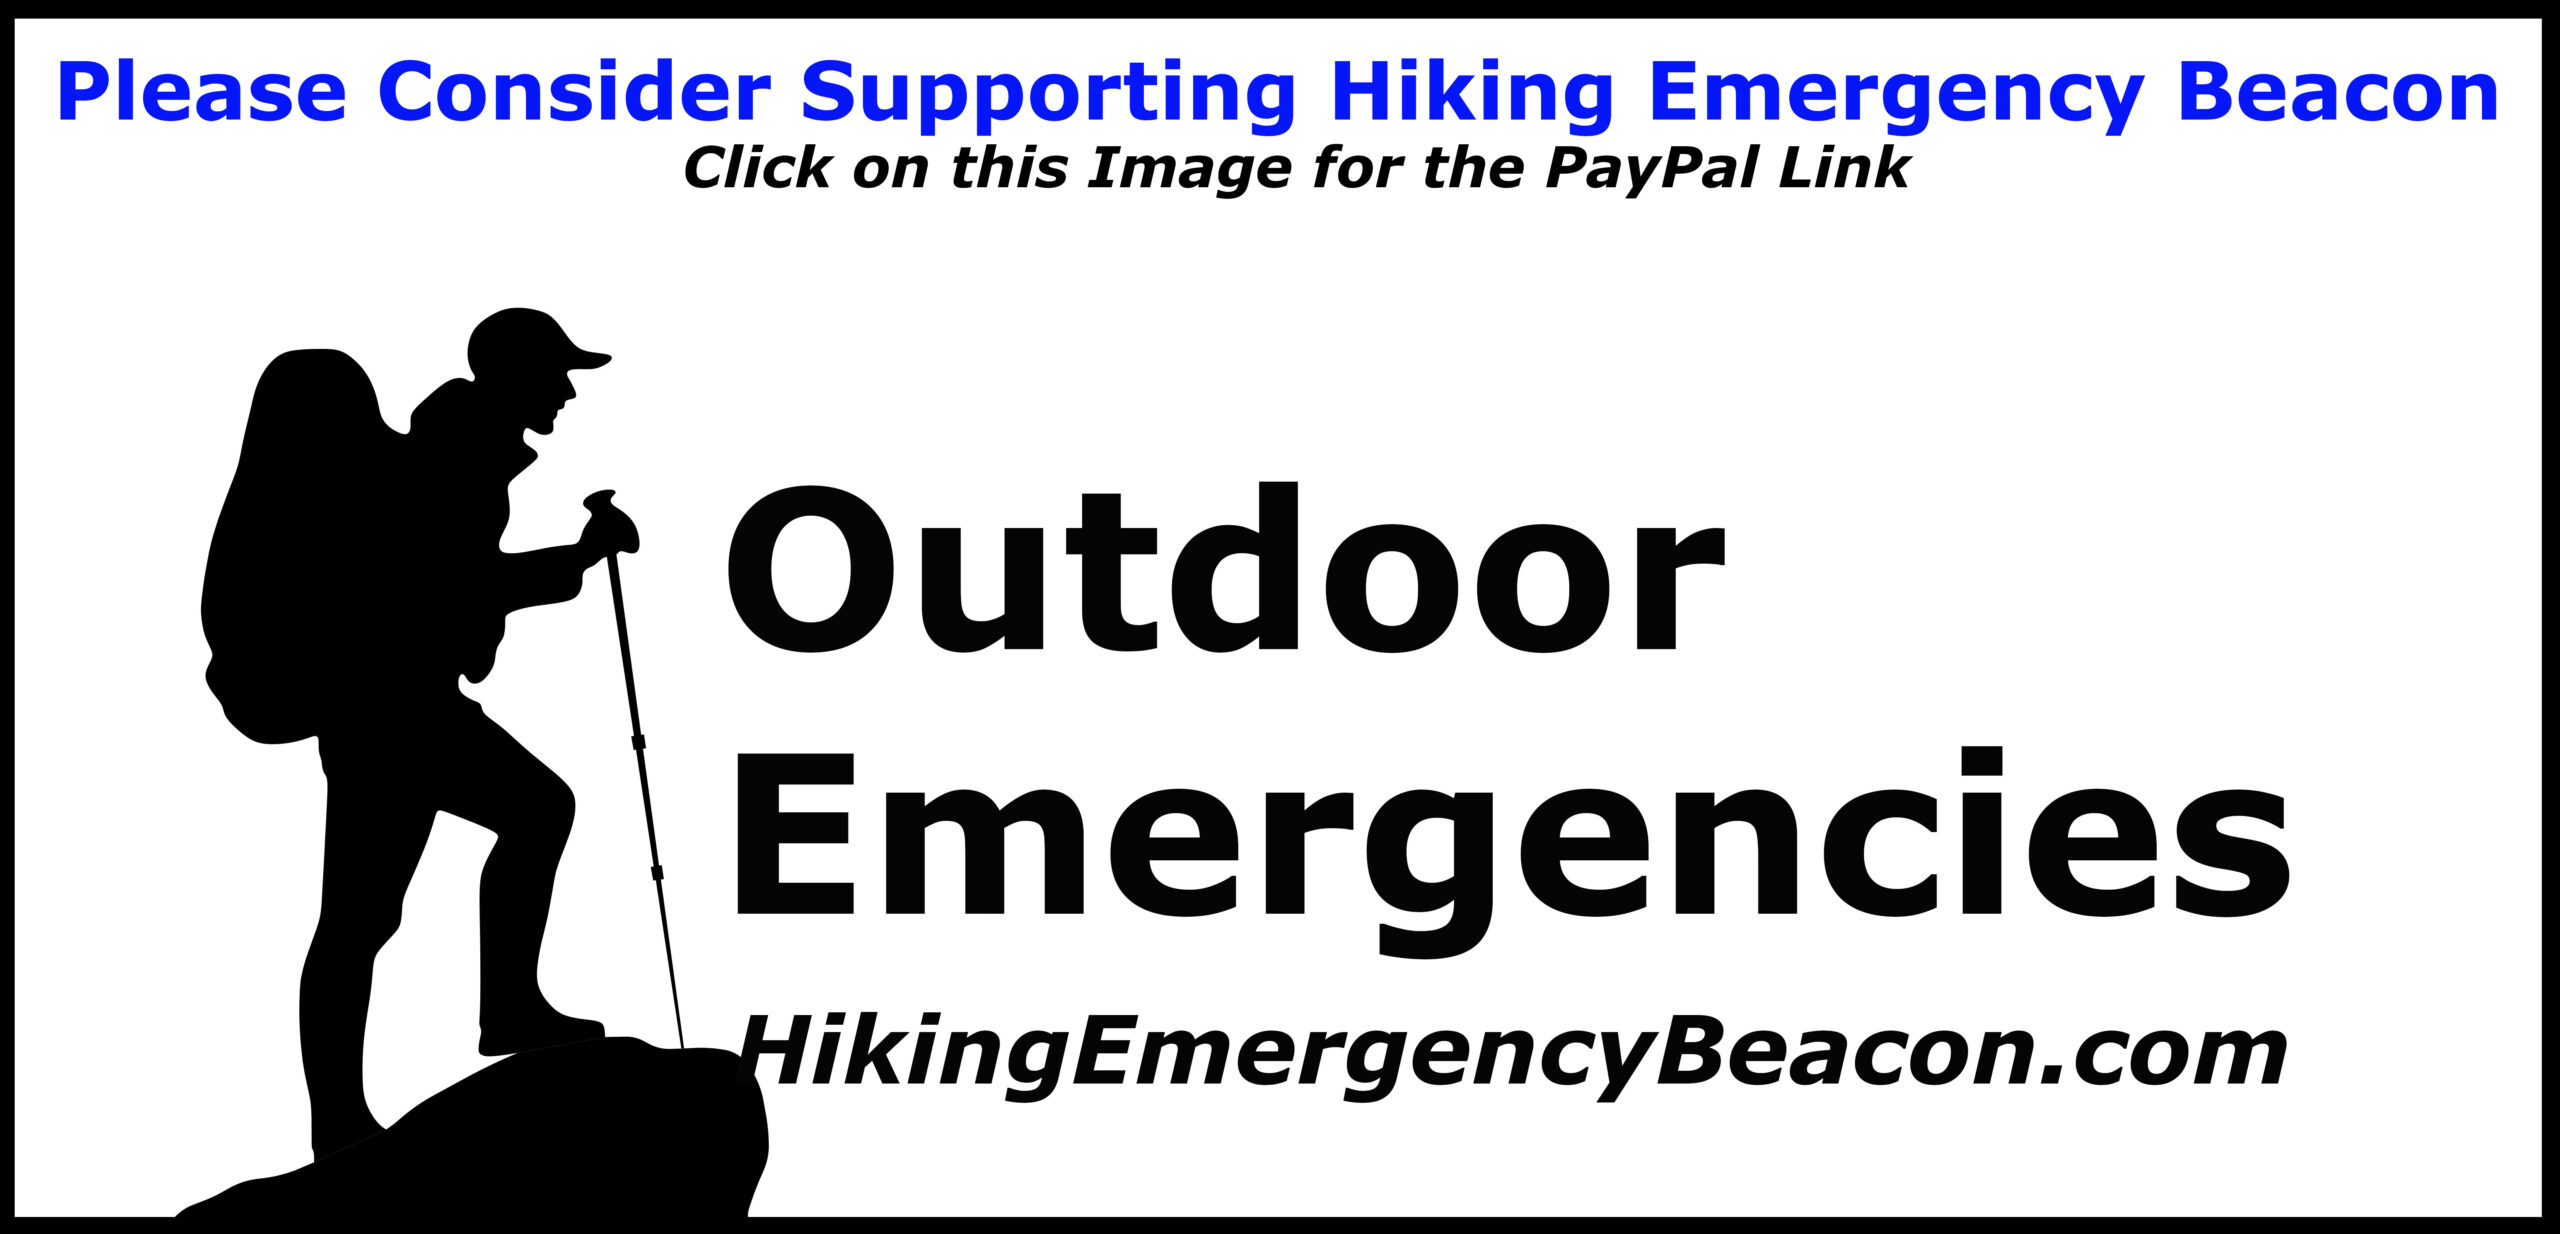 Support Hiking Emergency Beacon